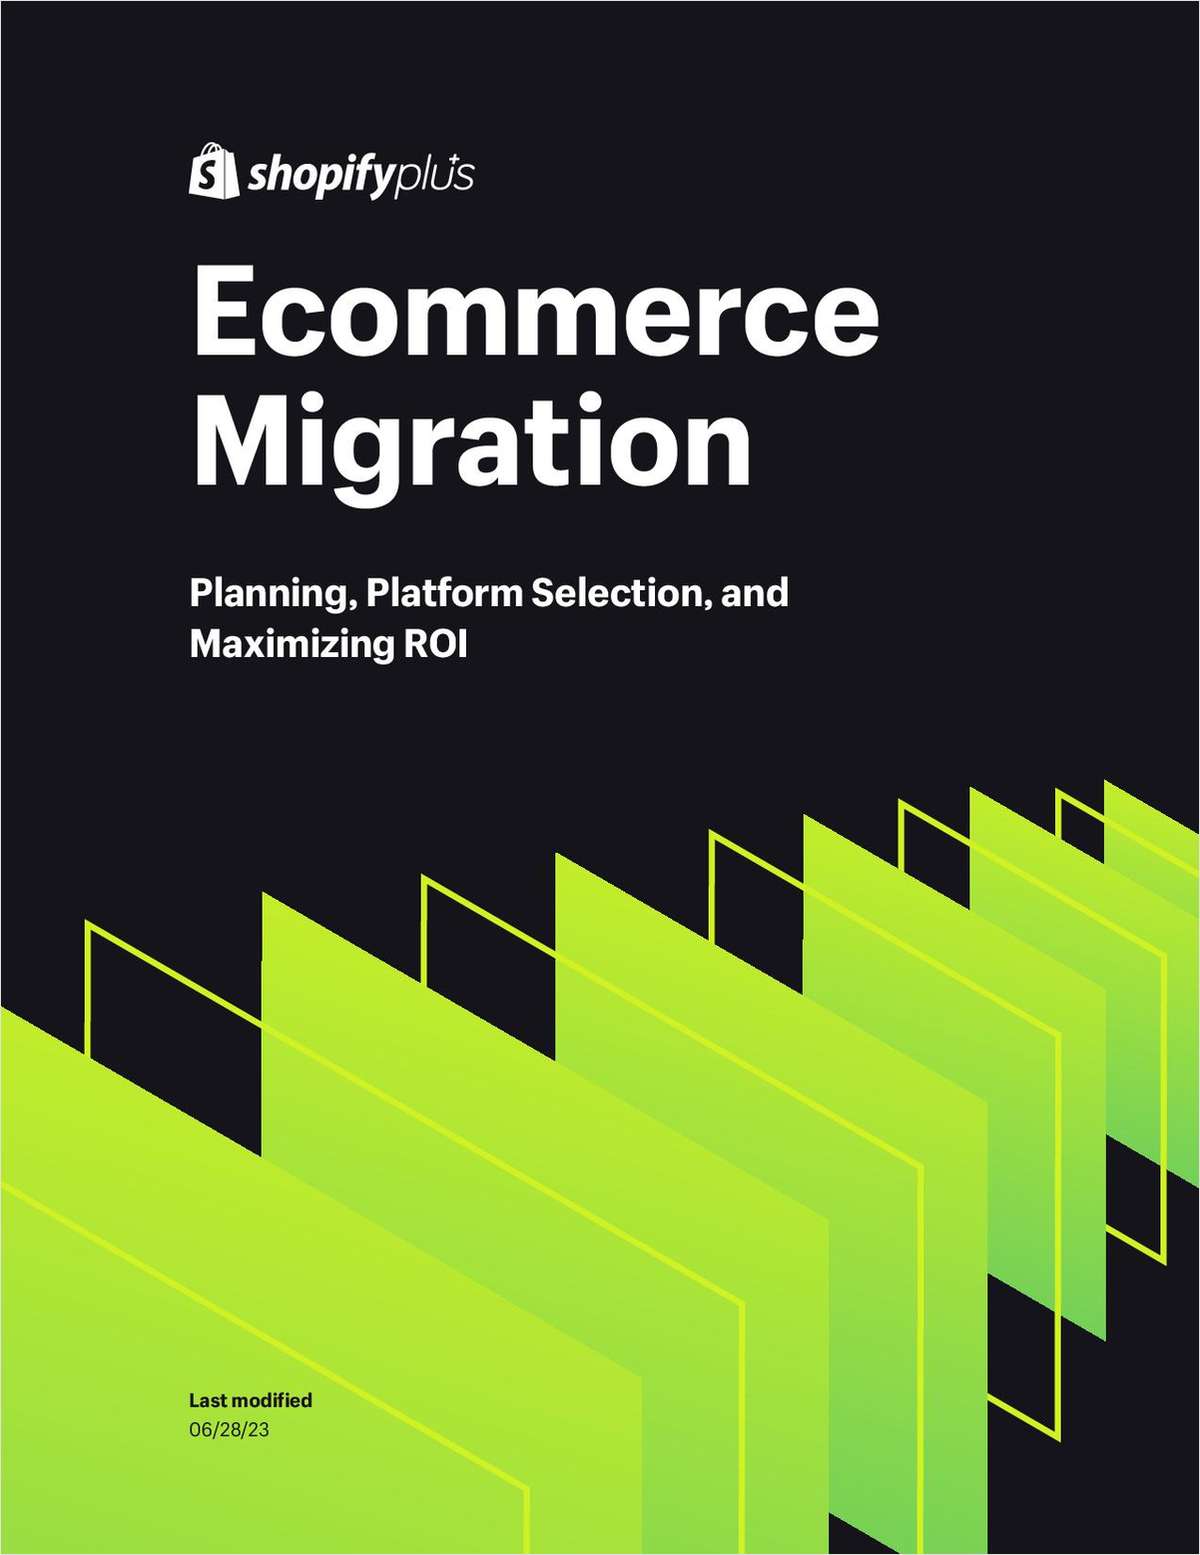 Best practices for ecommerce migration planning, platform selection, and maximizing ROI.